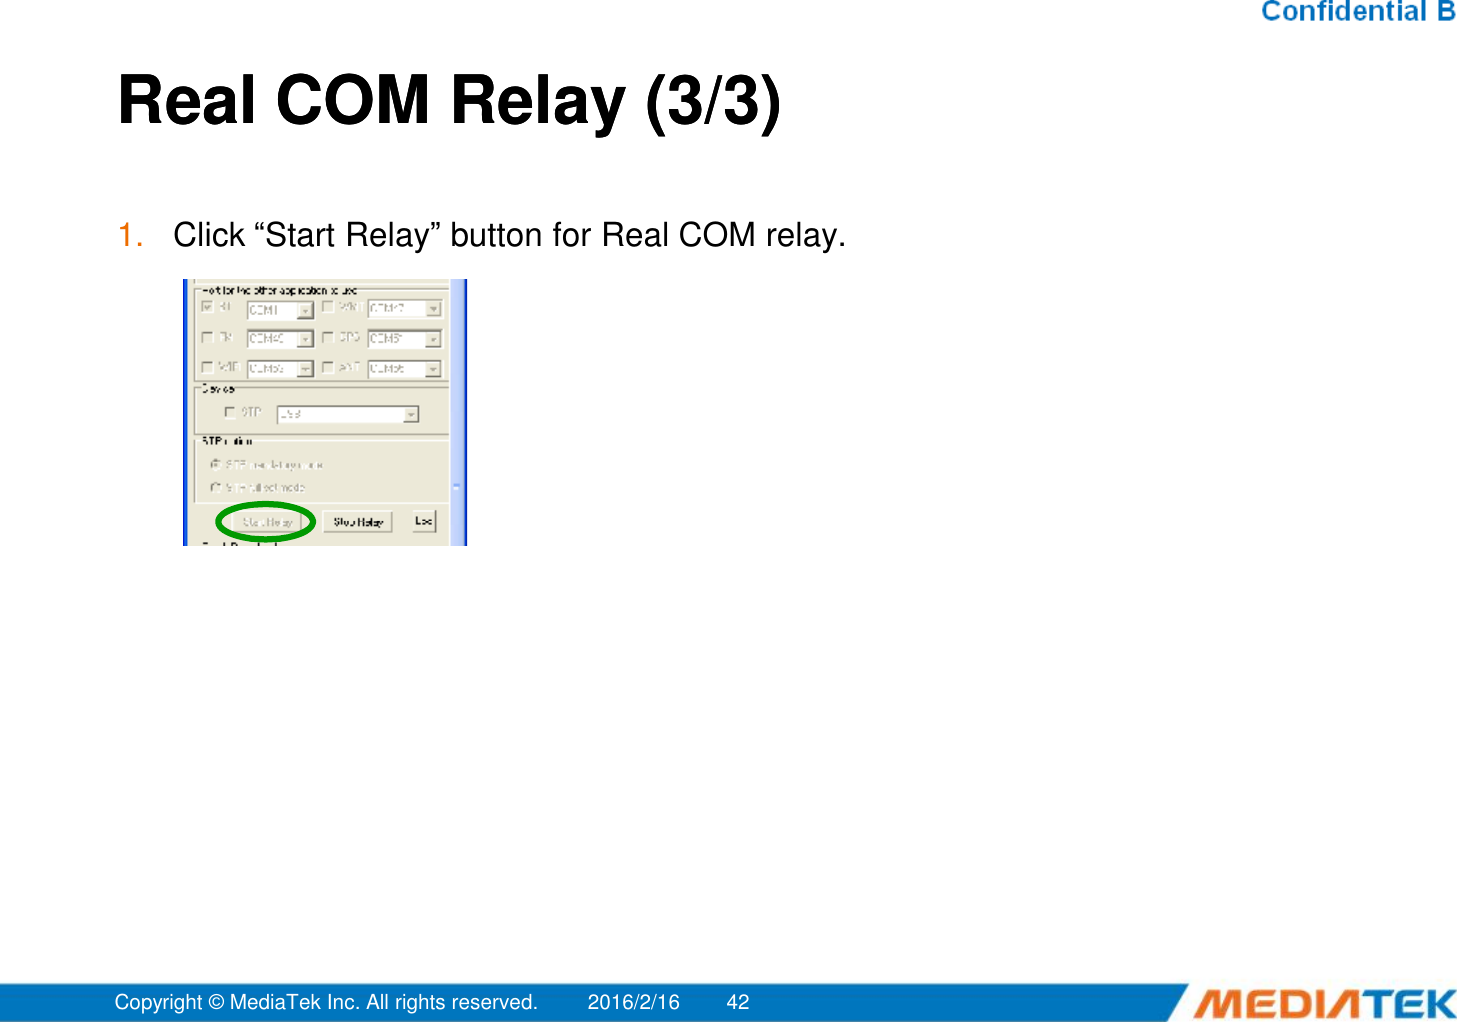 Real COM Relay (3/3)Real COM Relay (3/3)1. Click “Start Relay” button for Real COM relay.2016/2/16Copyright © MediaTek Inc. All rights reserved. 42